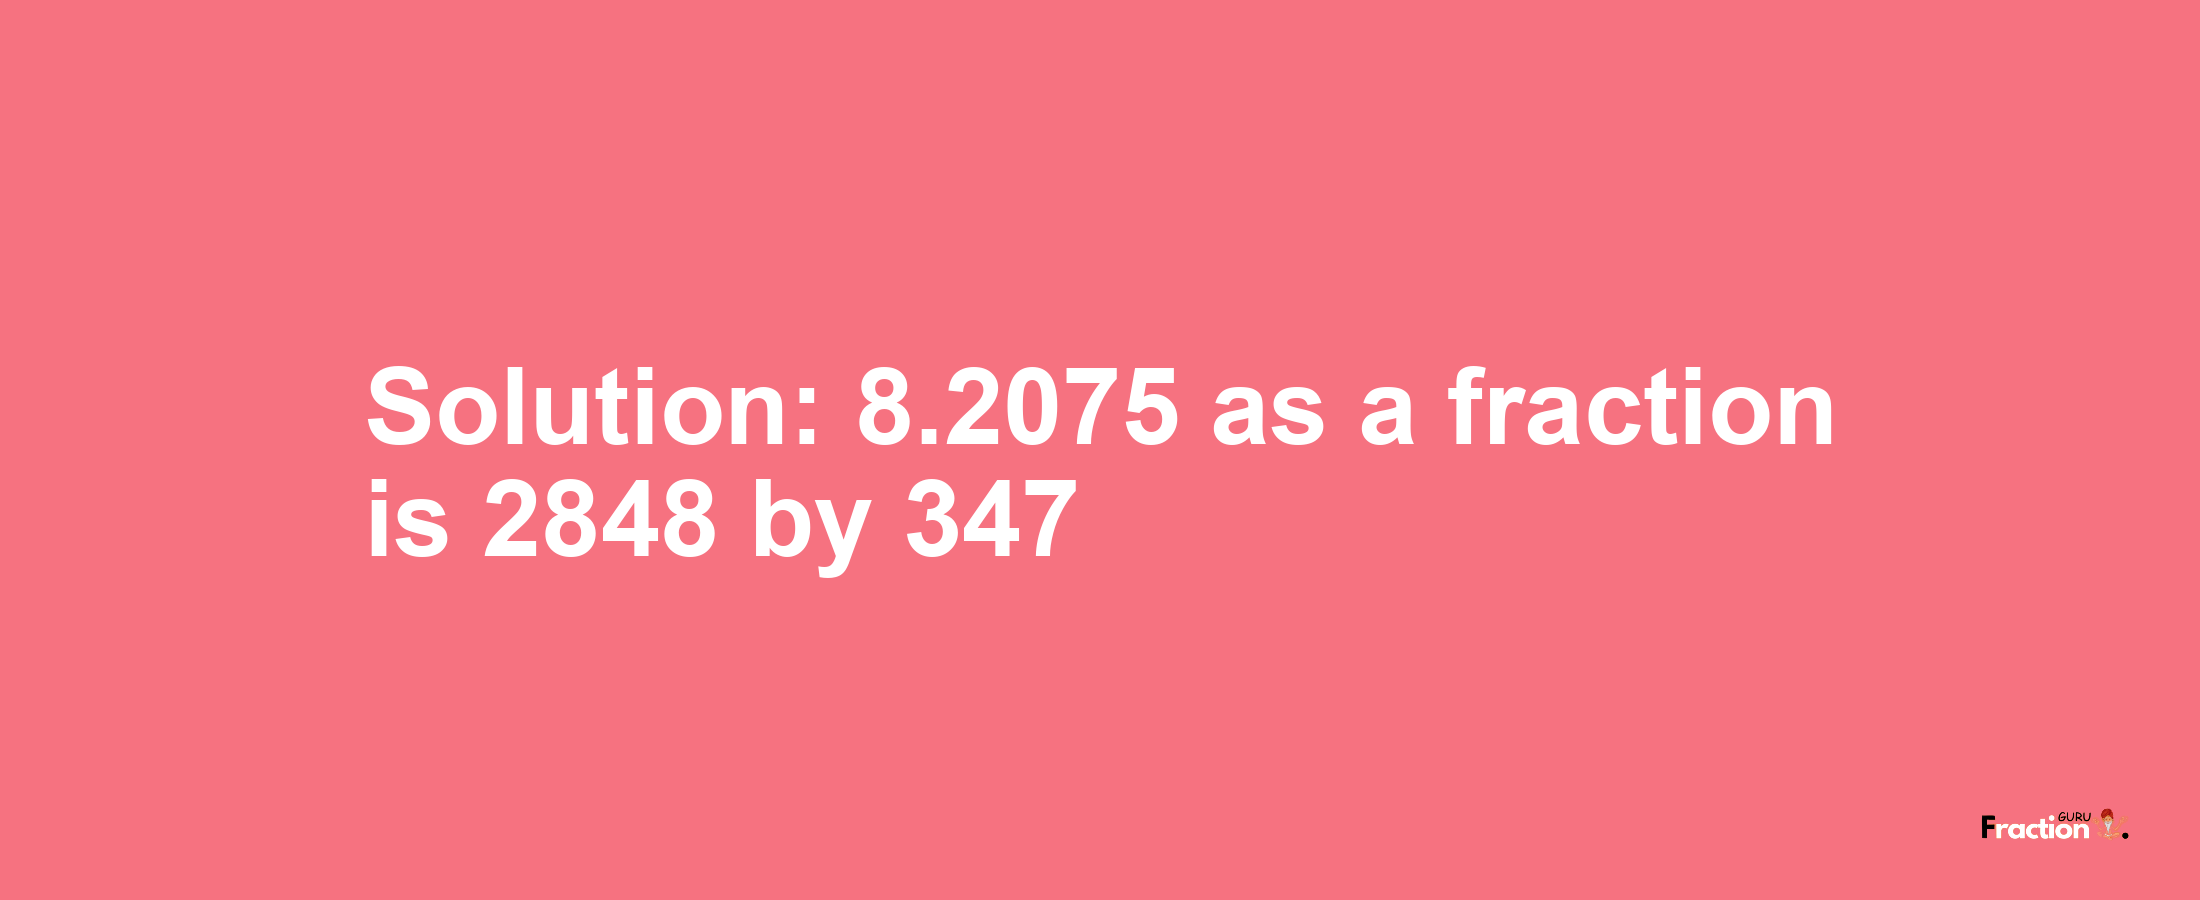 Solution:8.2075 as a fraction is 2848/347